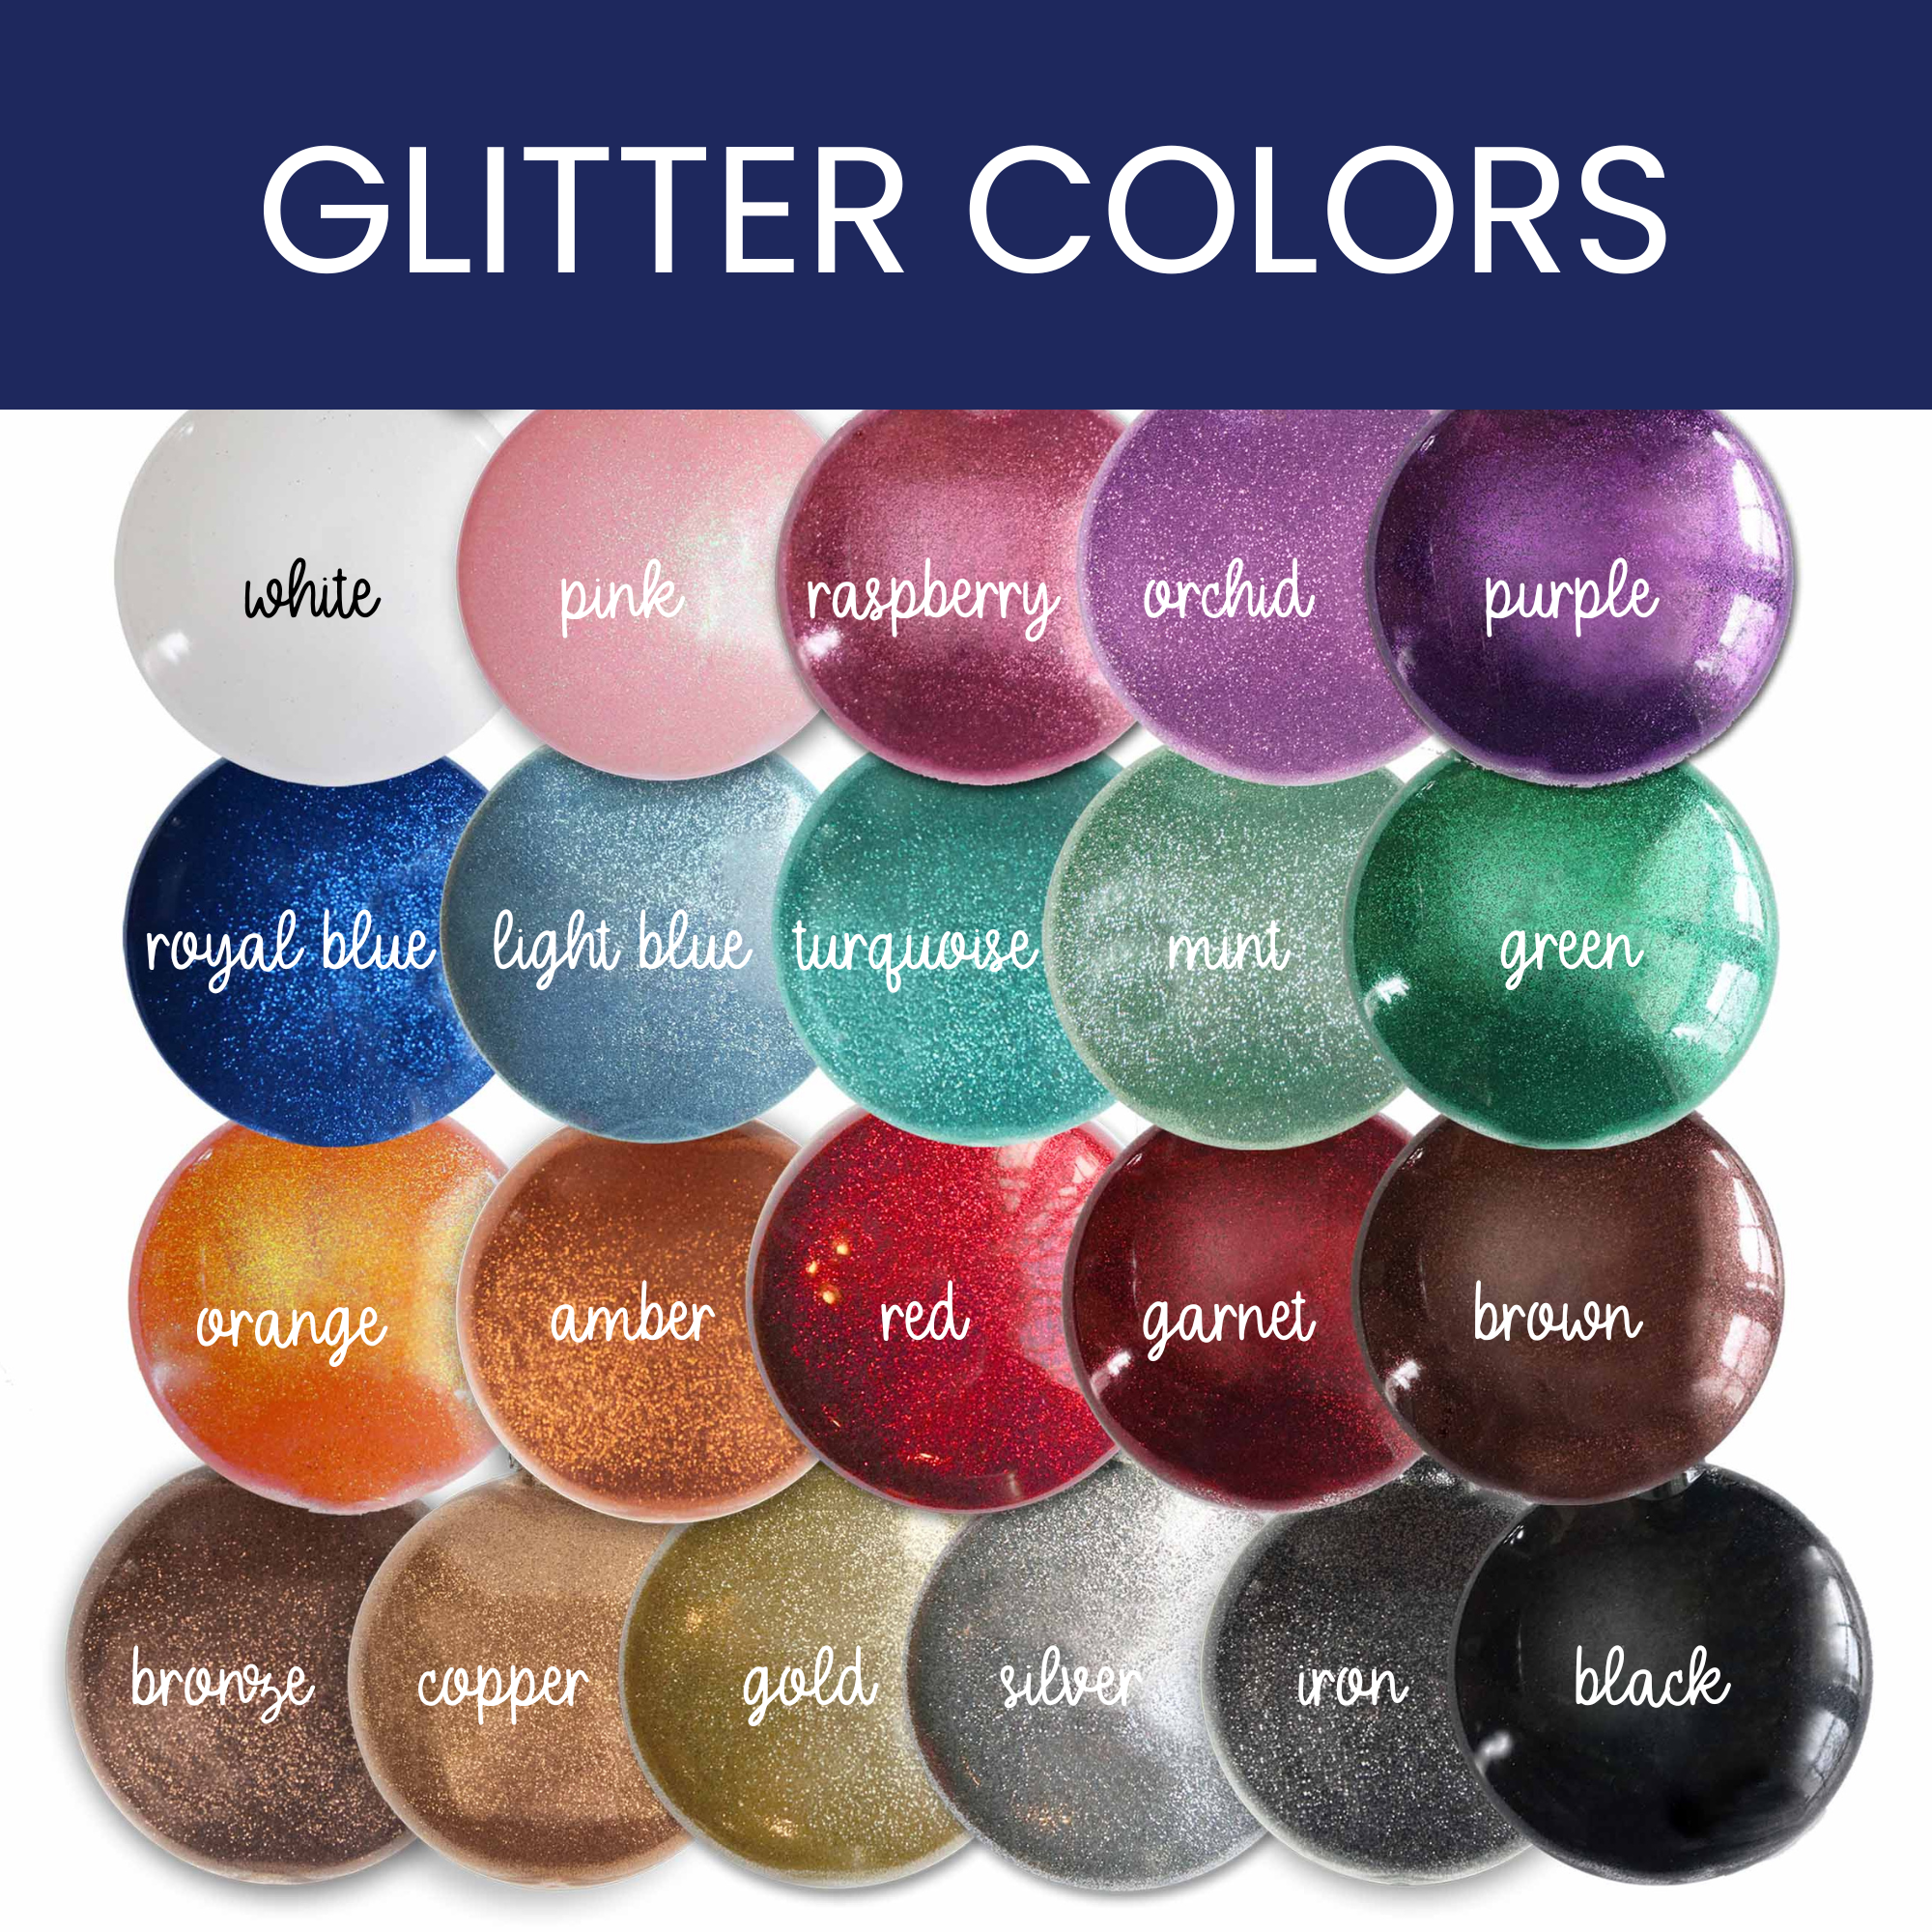 Infographic showing all of the glitter colors including white, pink, raspberry, orchid, purple, royal blue, light blue, turquoise, mint, green, orange, amber, red, garnet, brown, bronze, copper, gold, silver, iron and black